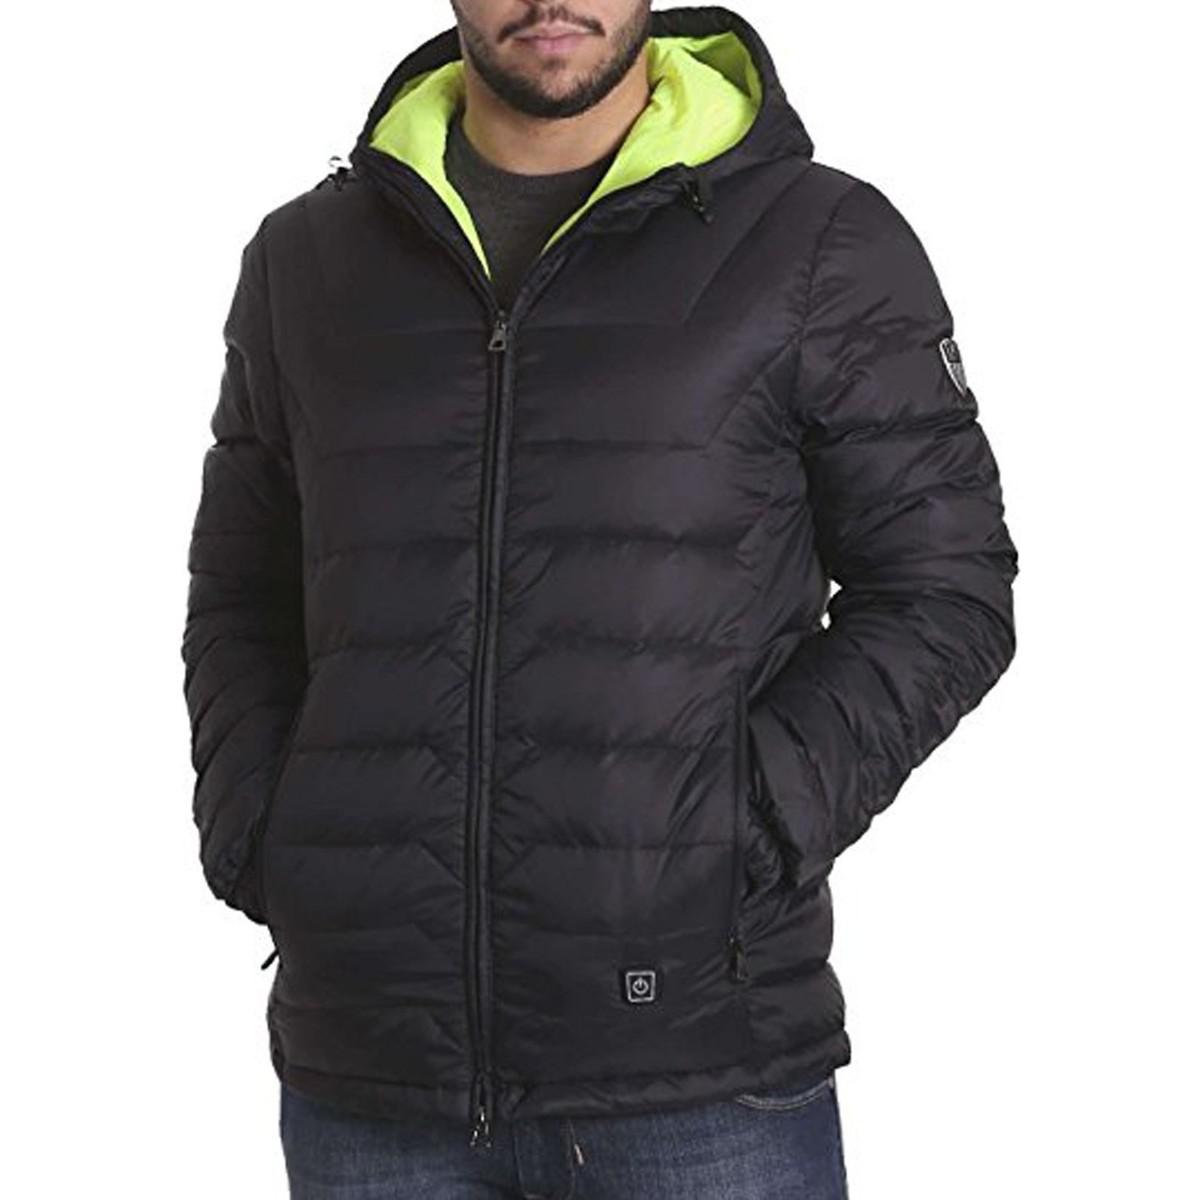 EA7 Down Jacket, Heated 6ypb43 Pnc5z 